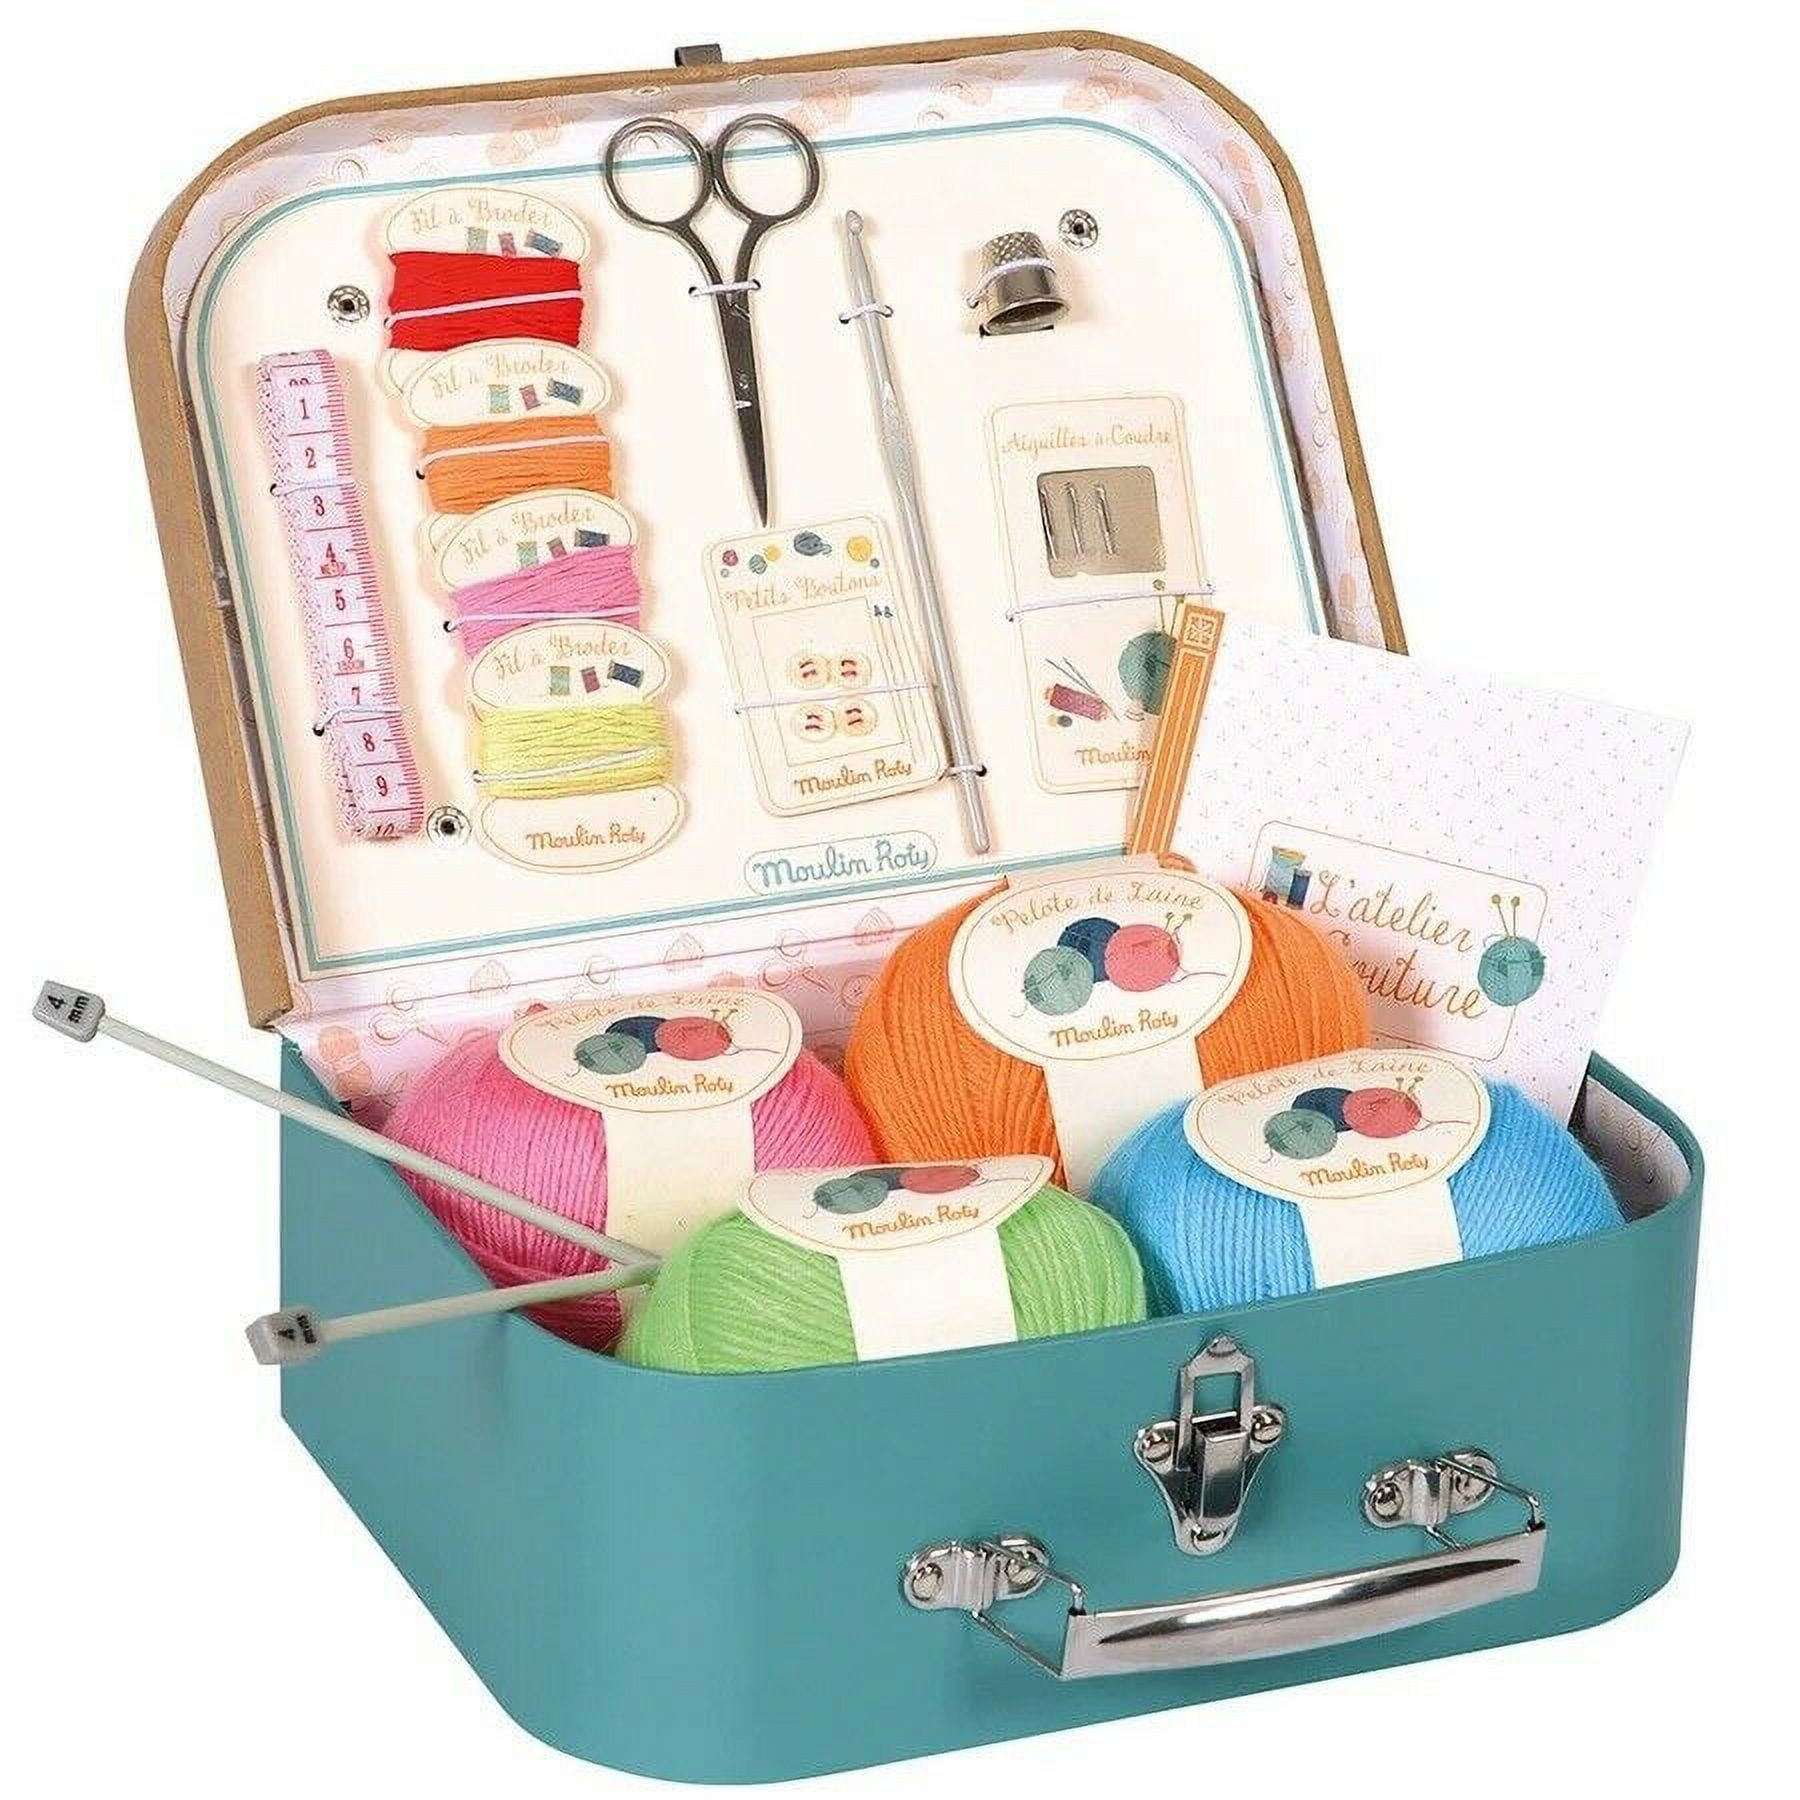 Moulin Roty Sewing Kit (Couture Jouets d'heir) Crochet /Knitting/Sewing!